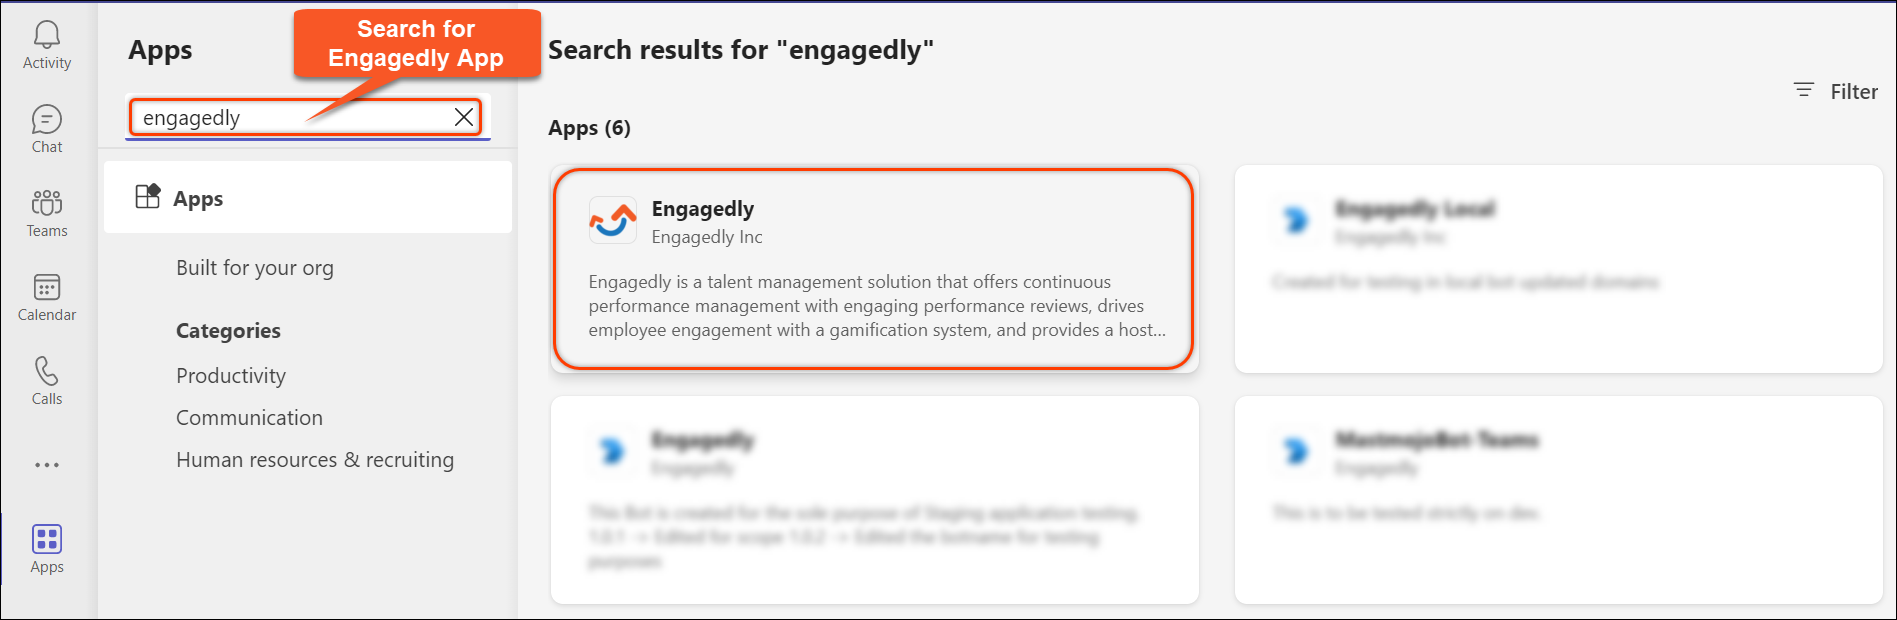 search_and_click_engagedly.png